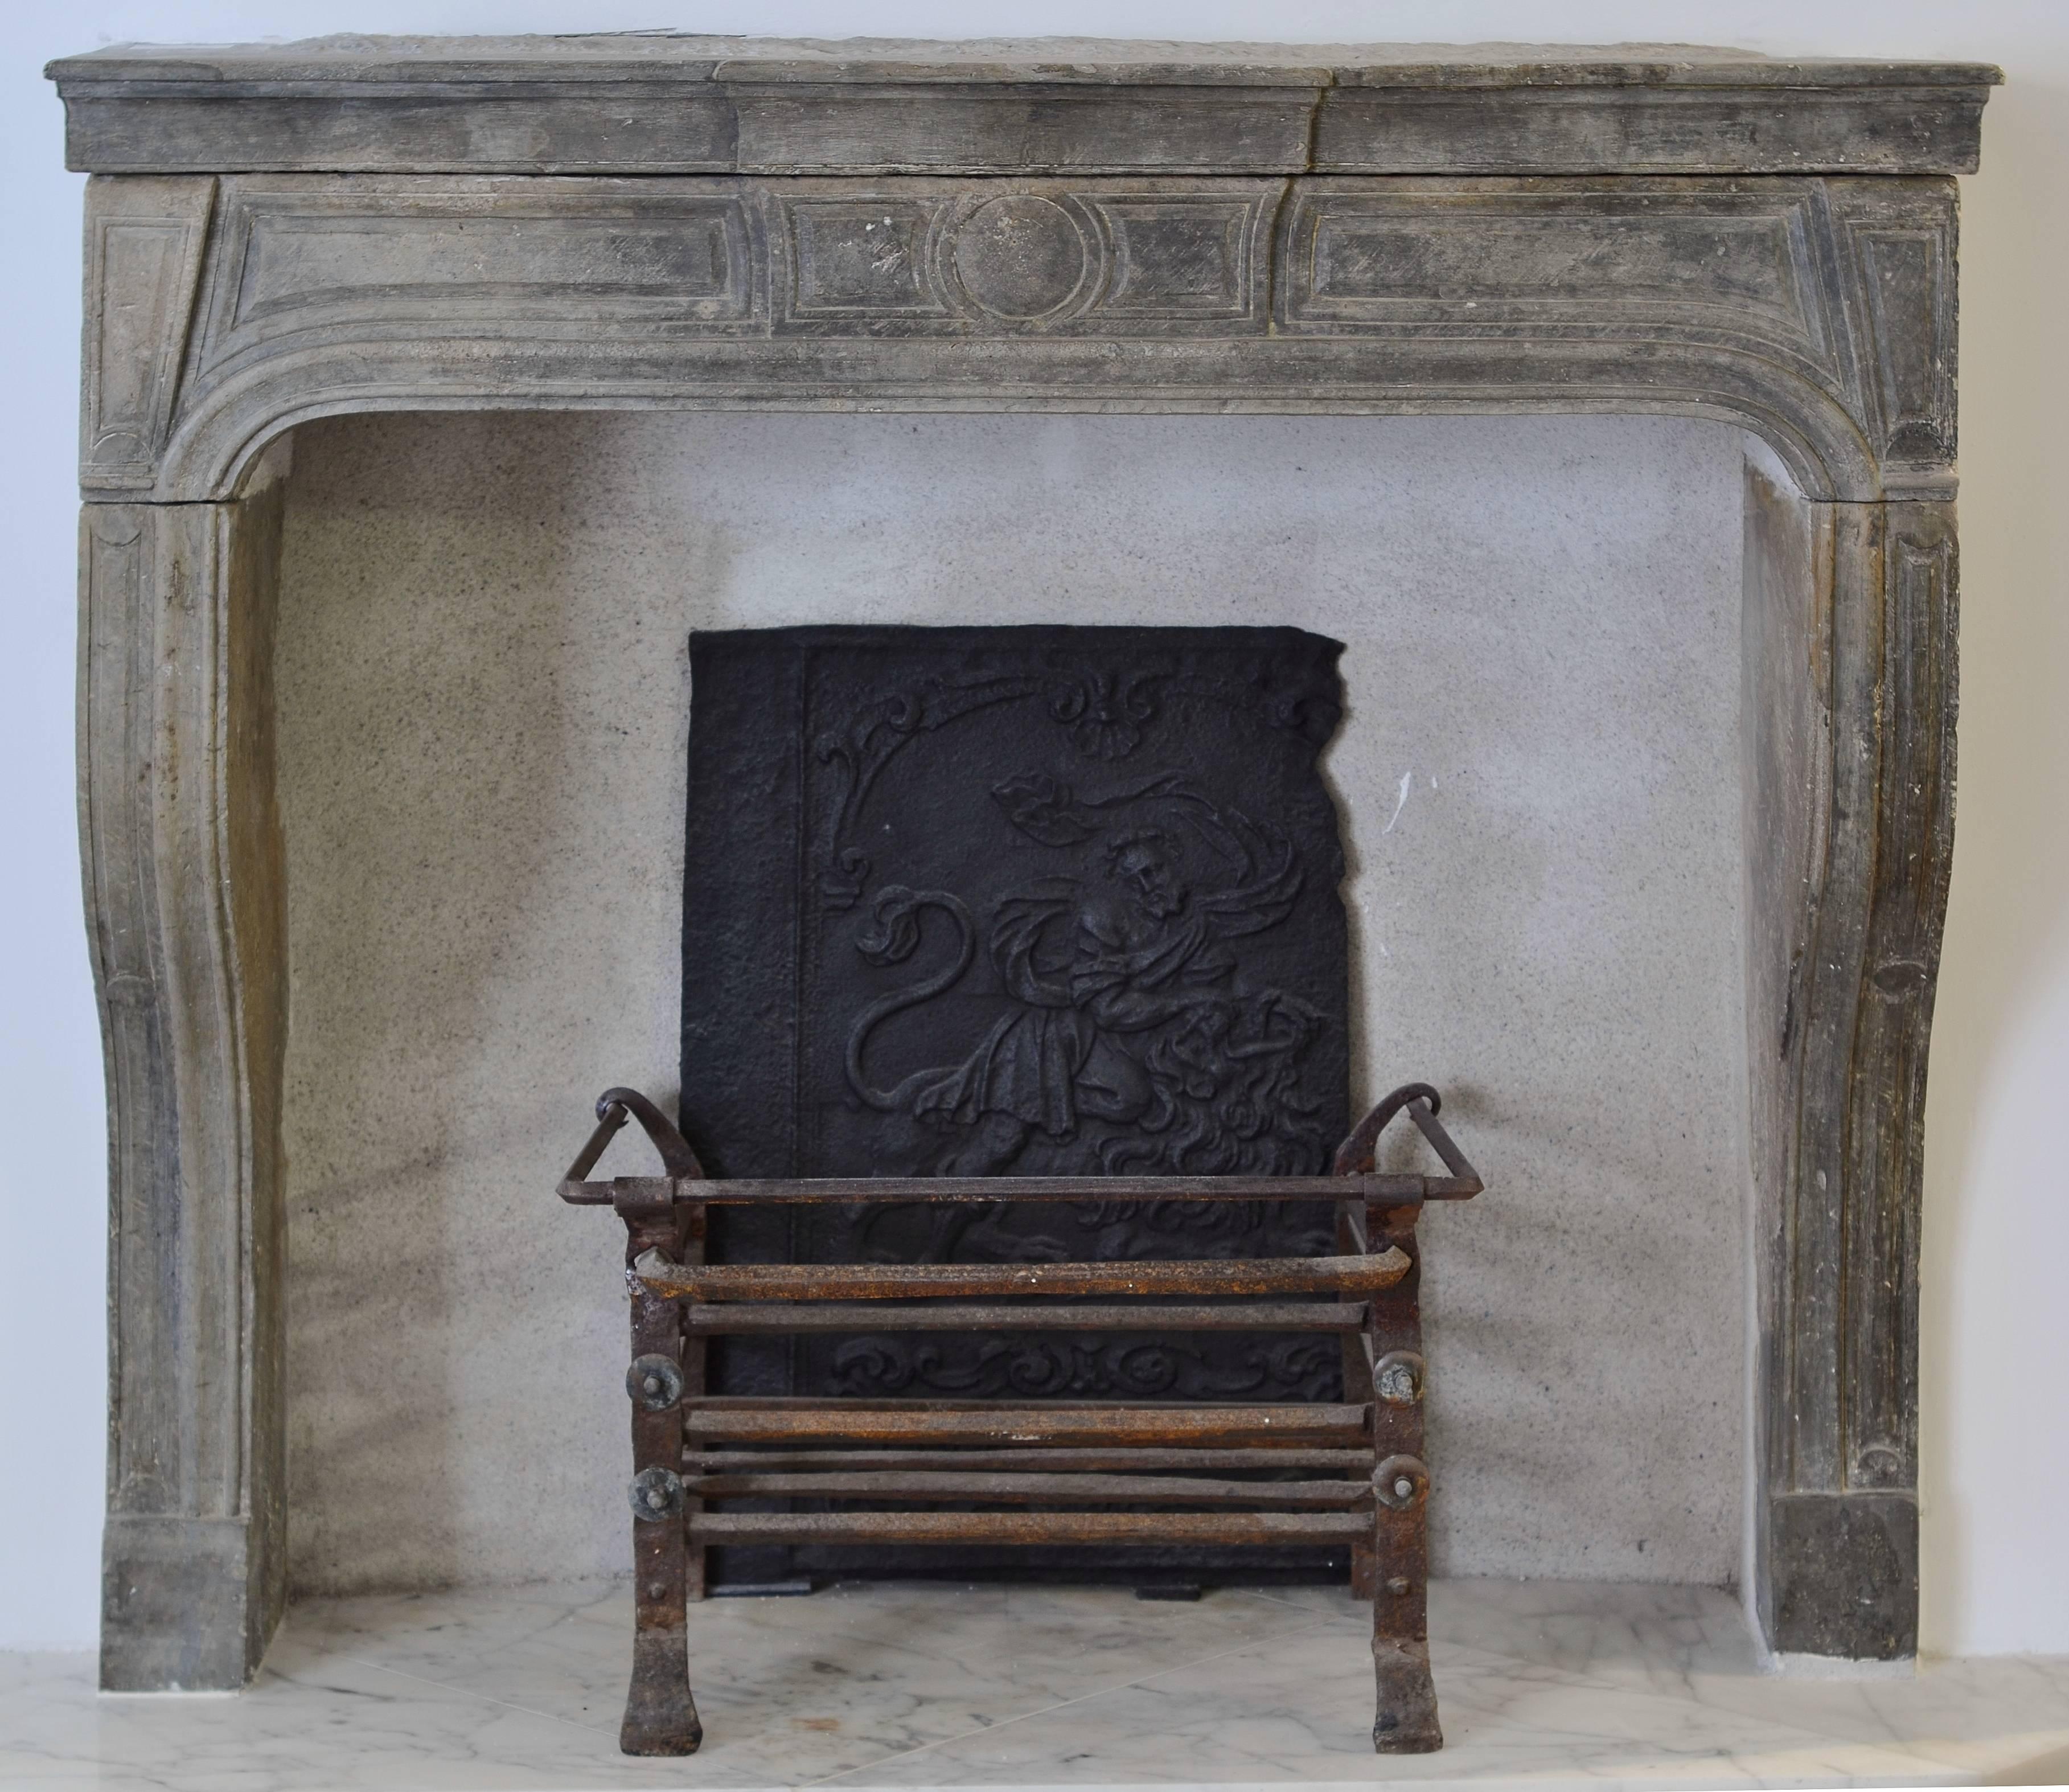 This unique late 17th century French limestone Louis XIV is very powerful in its purity. The simple yet impressive profile give it an unique sense of beauty. The warm shades of grey make it an exceptional mantelpiece that will enrich any